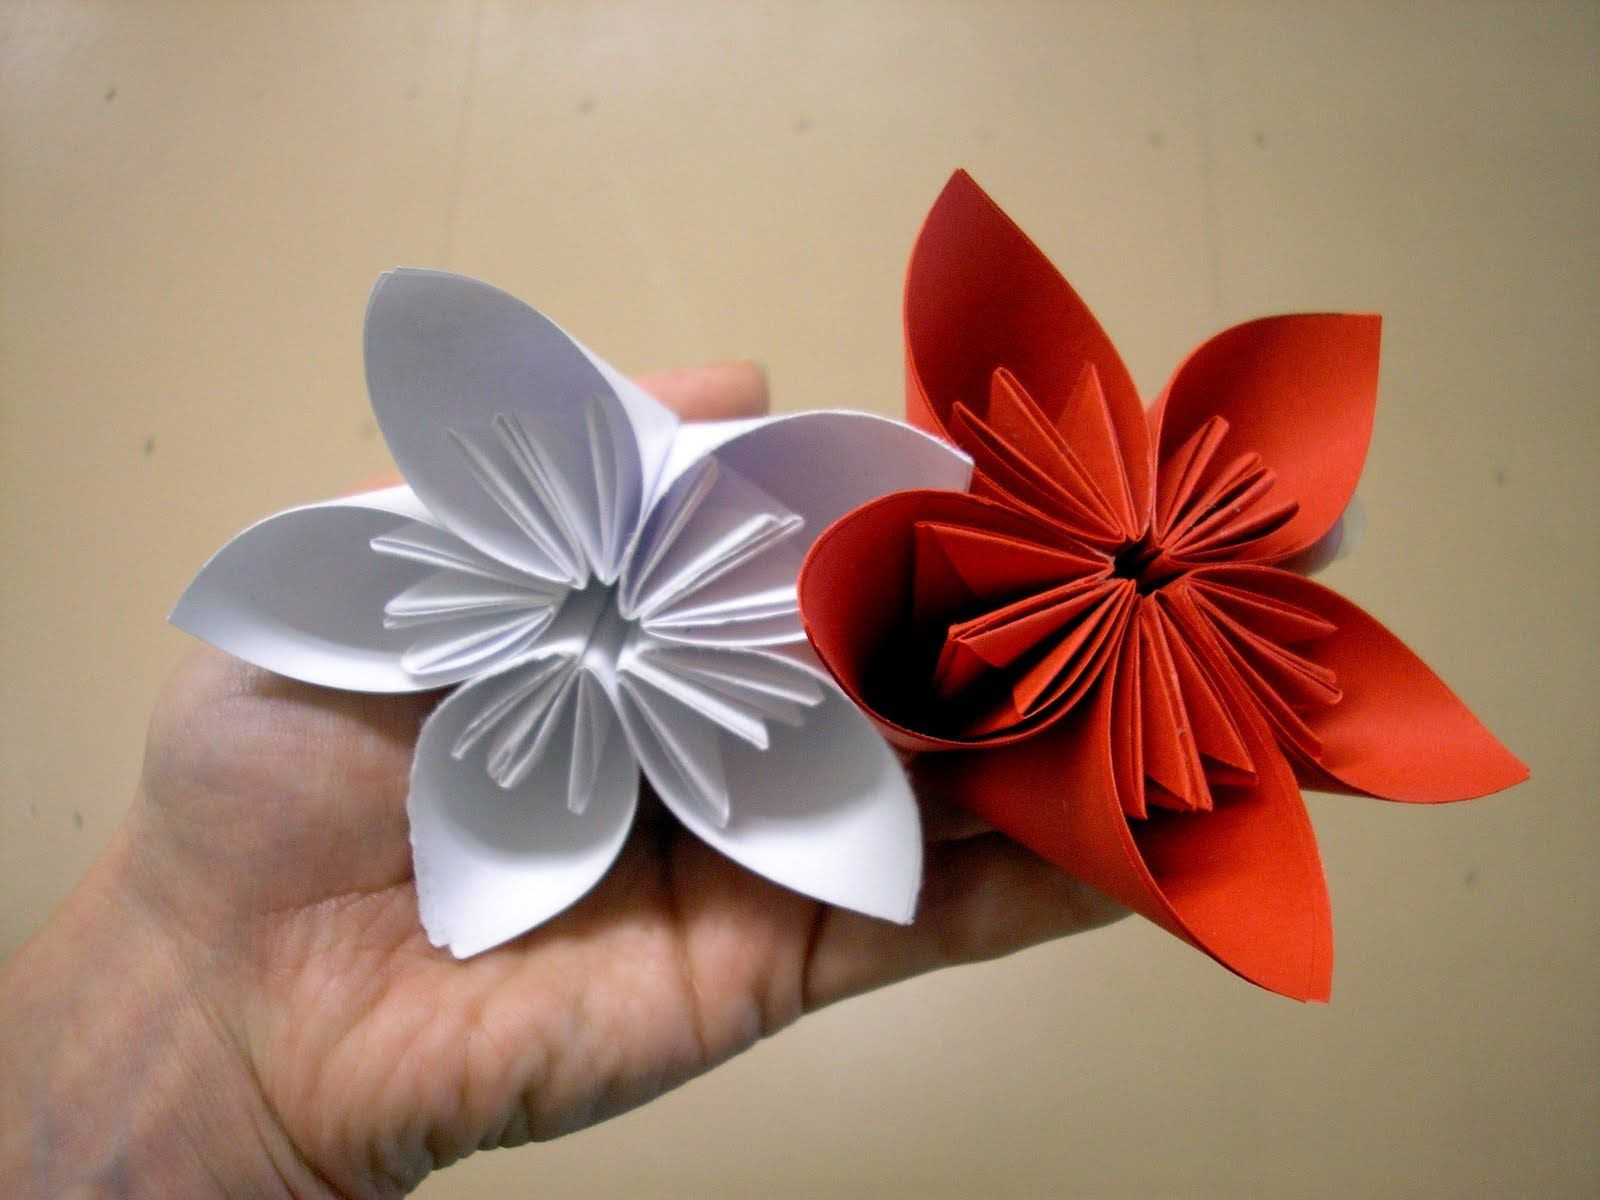 How To Make Origami Lotus Flower Video Top 10 Punto Medio Noticias How To Make Origami Paper Flowers Video